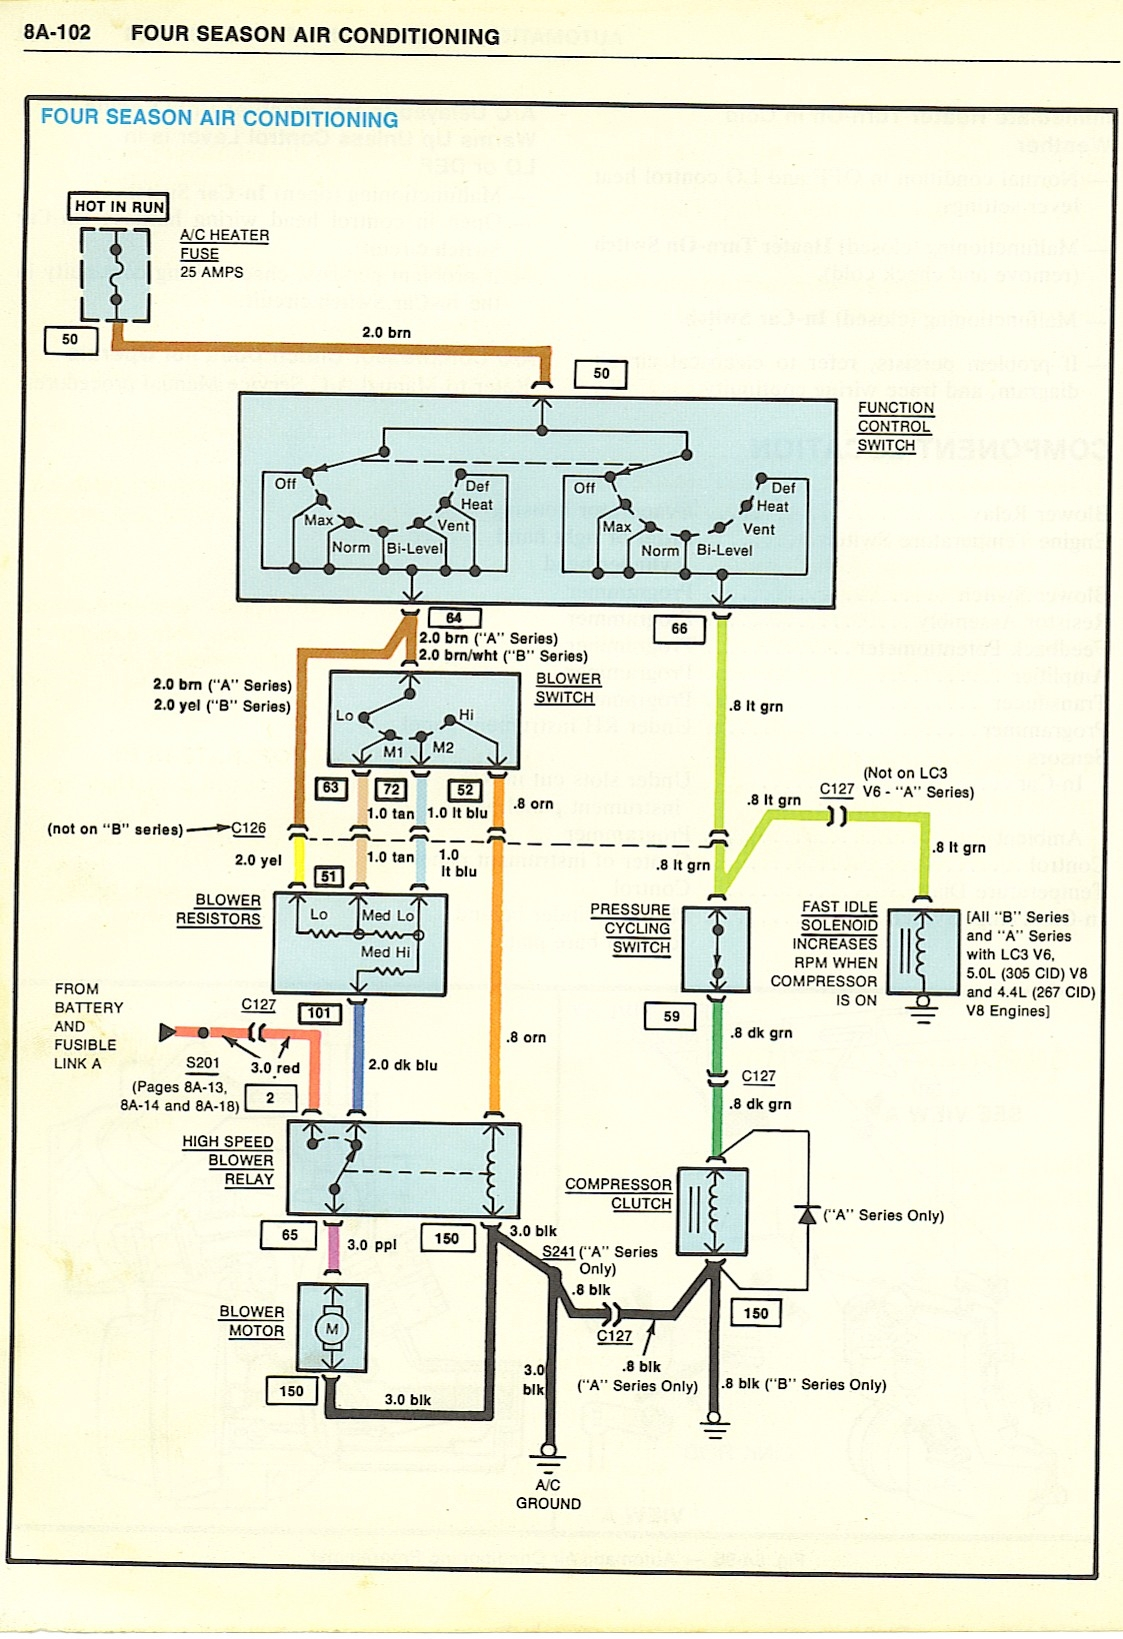 Air Conditioner Wiring Diagram Pdf 1966 Corvette Ac Wiring Search Wiring Diagrams